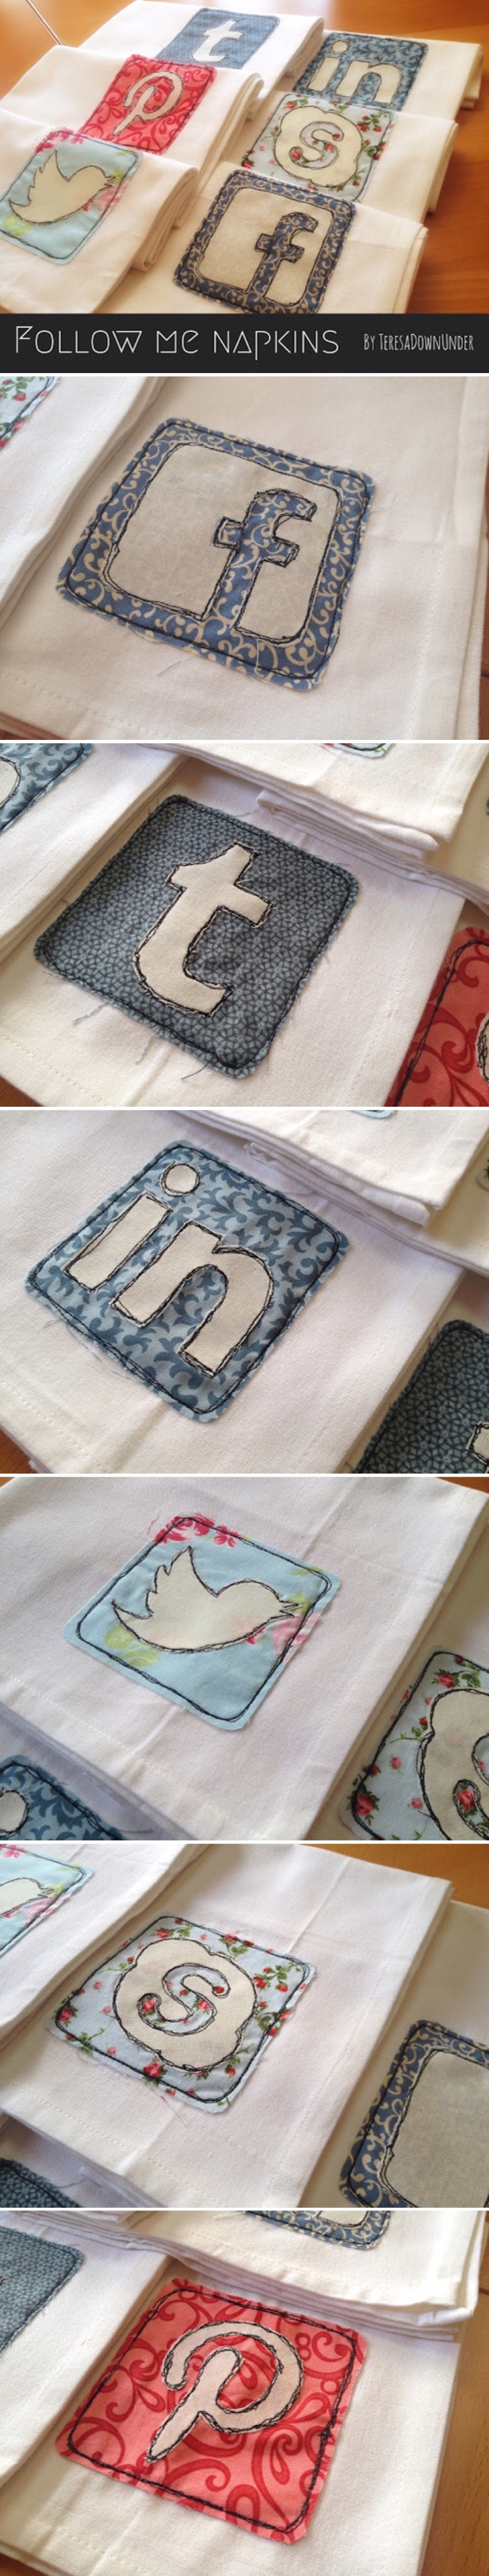 Tutorial and patterns for social media napkins - Follow me napkins